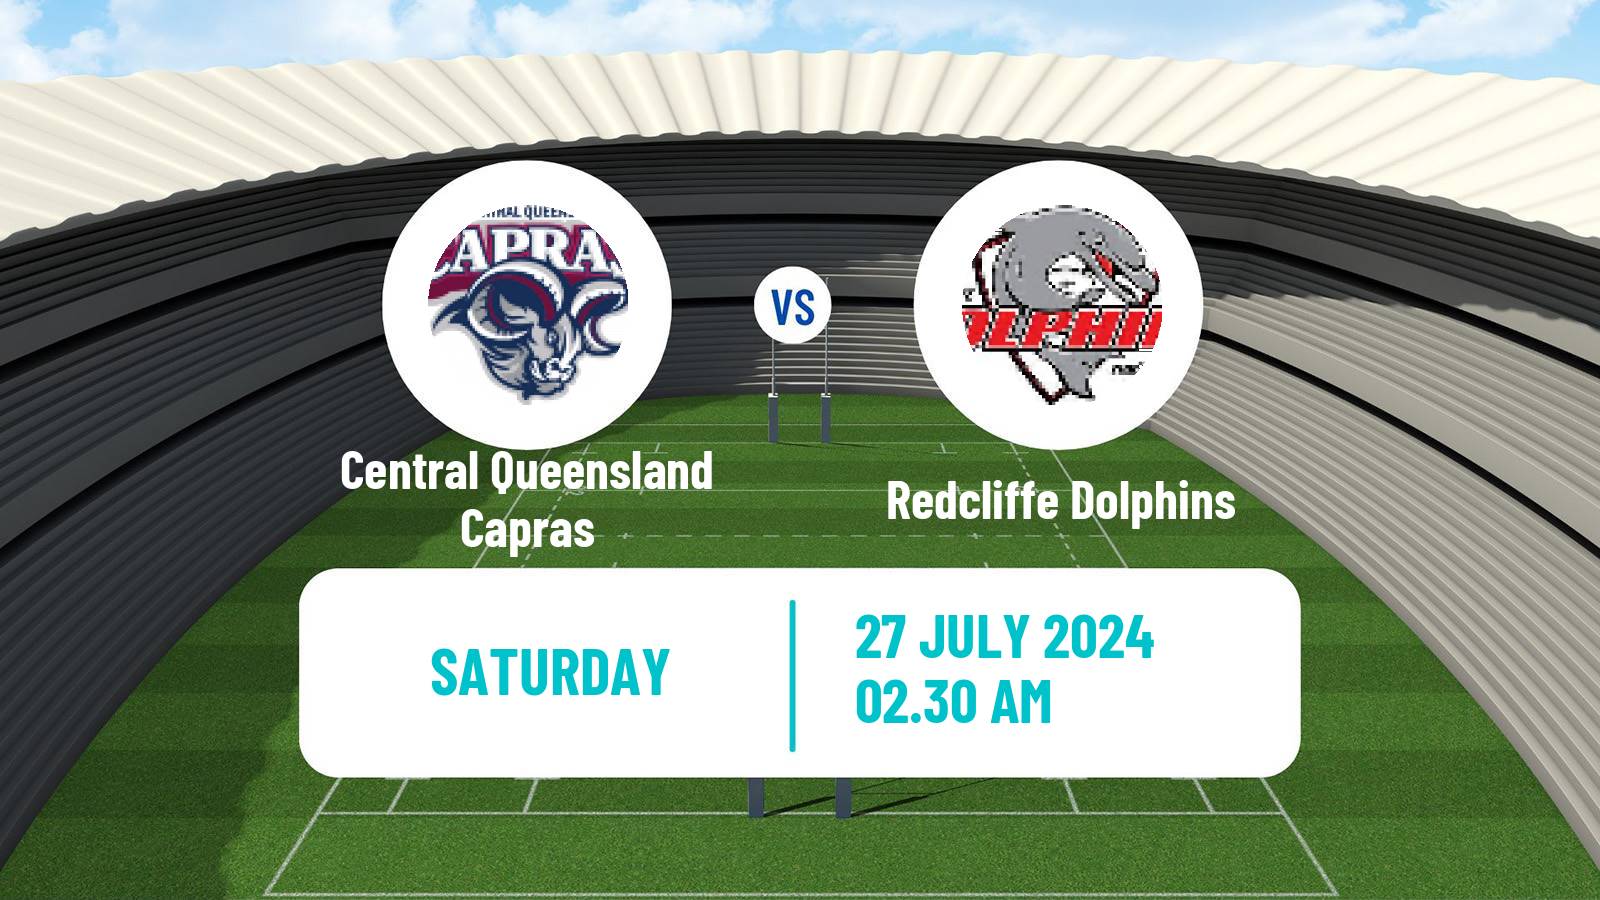 Rugby league Australian Queensland Cup Central Queensland Capras - Redcliffe Dolphins